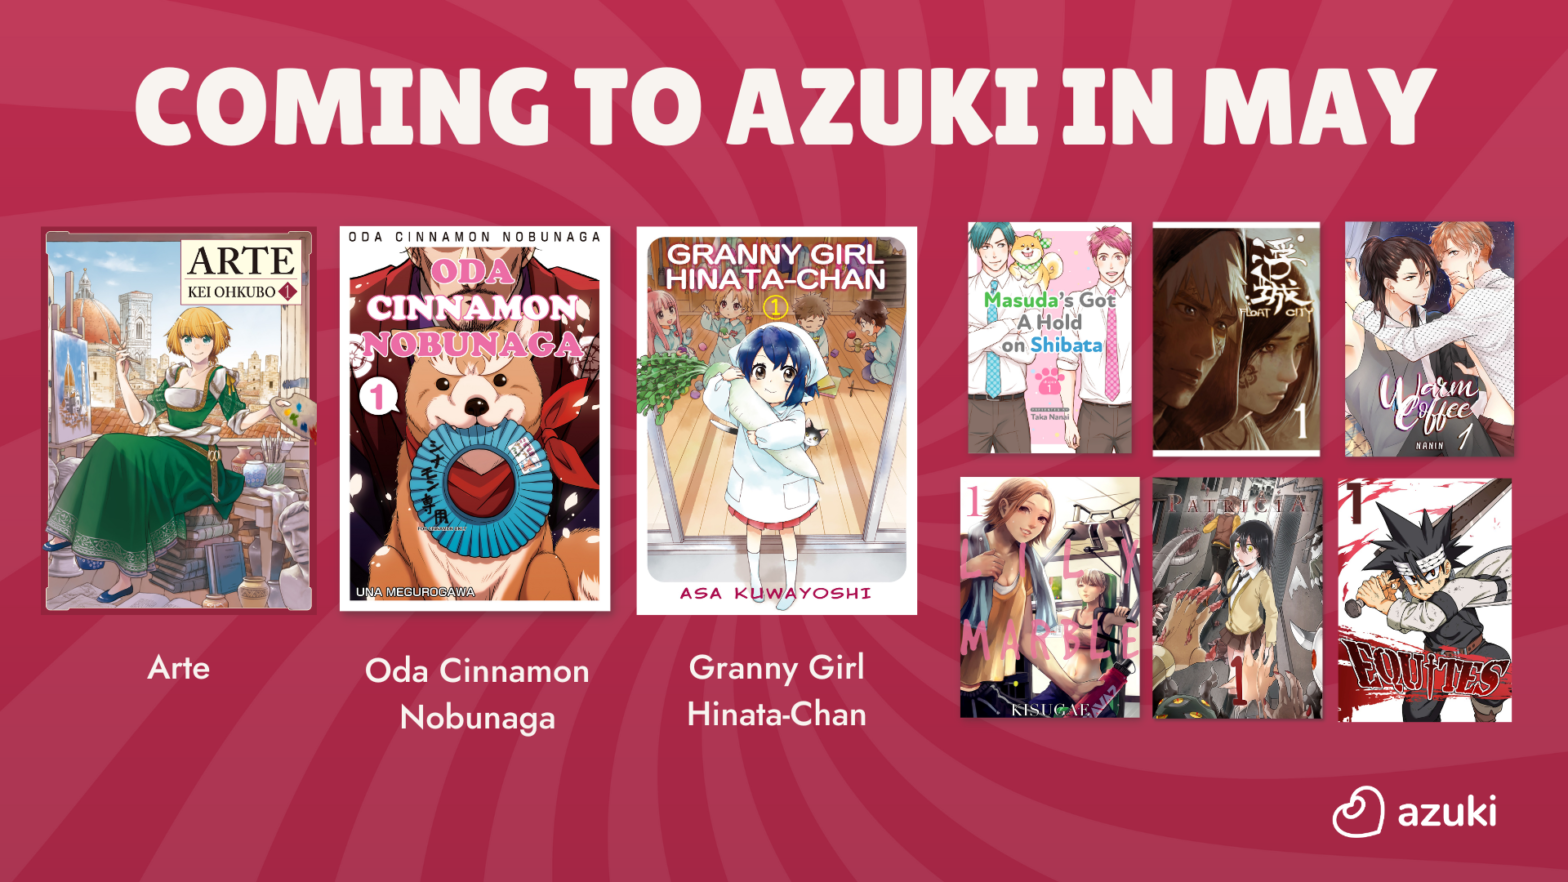 Coming to Azuki in May.